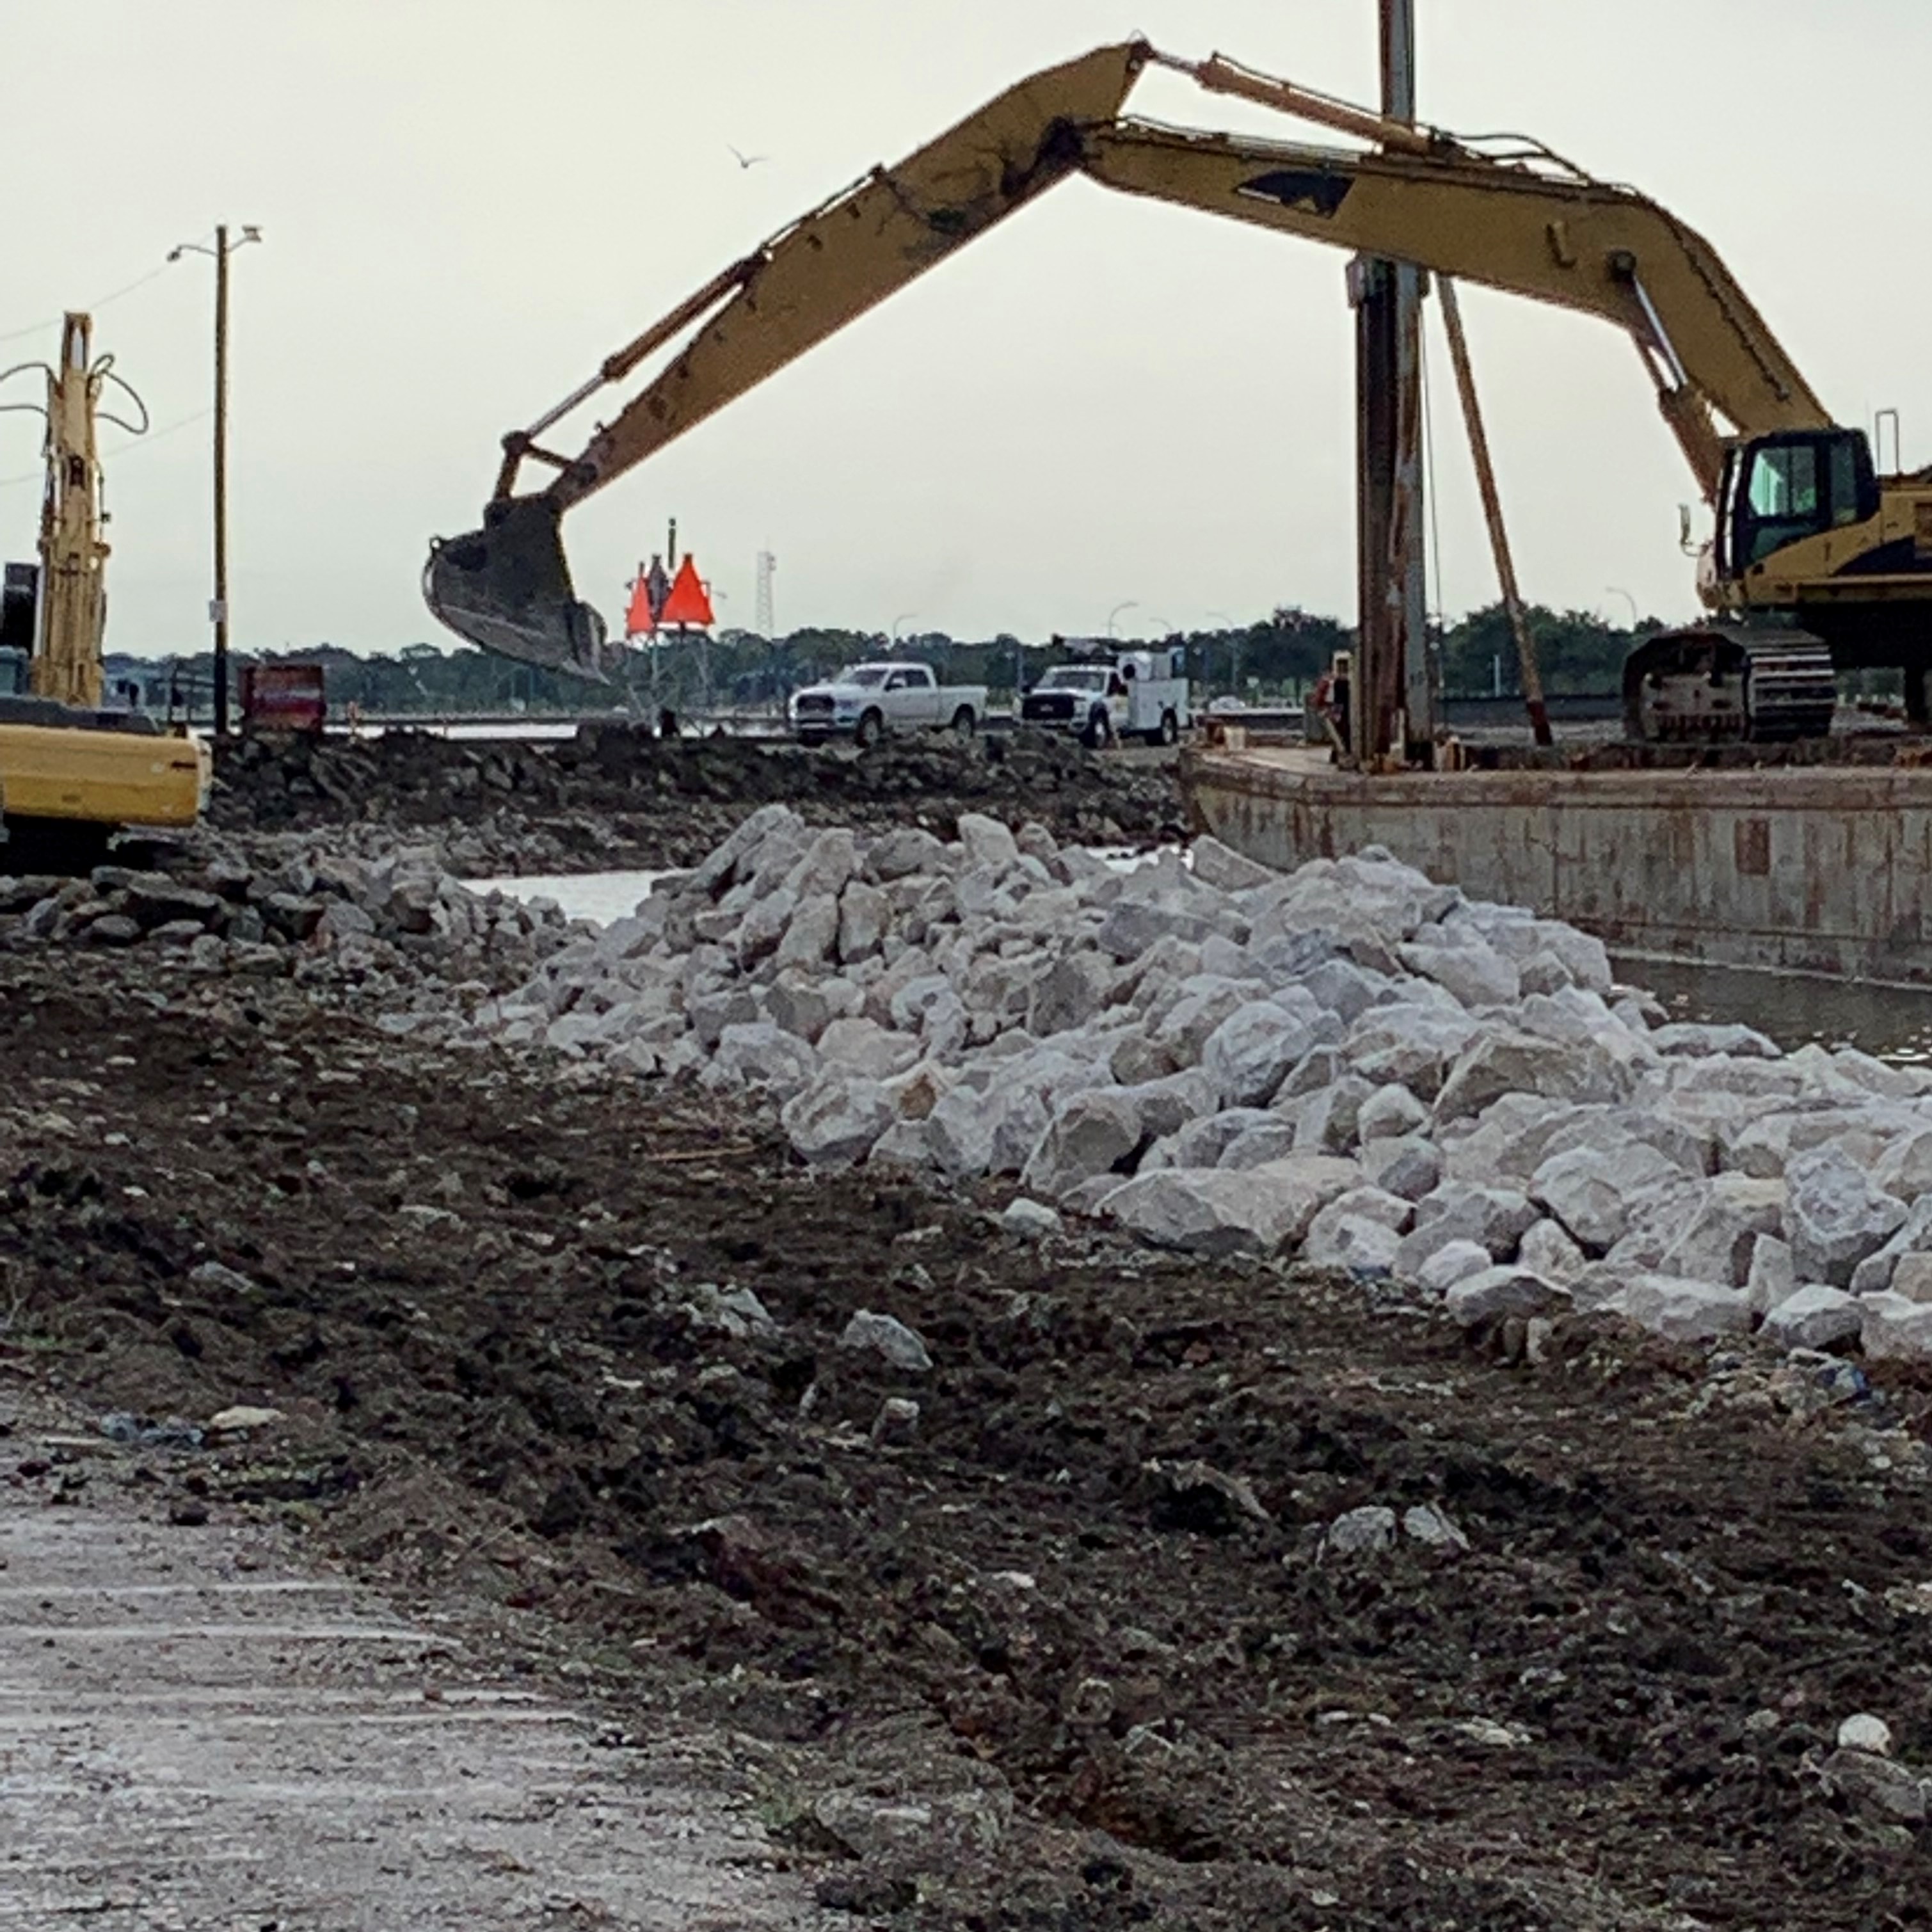 CREWS BEGIN TESTING THE DURABILITY OF THE RETAINING WALL ON THE BREAKWATER DRIVE PROJECT